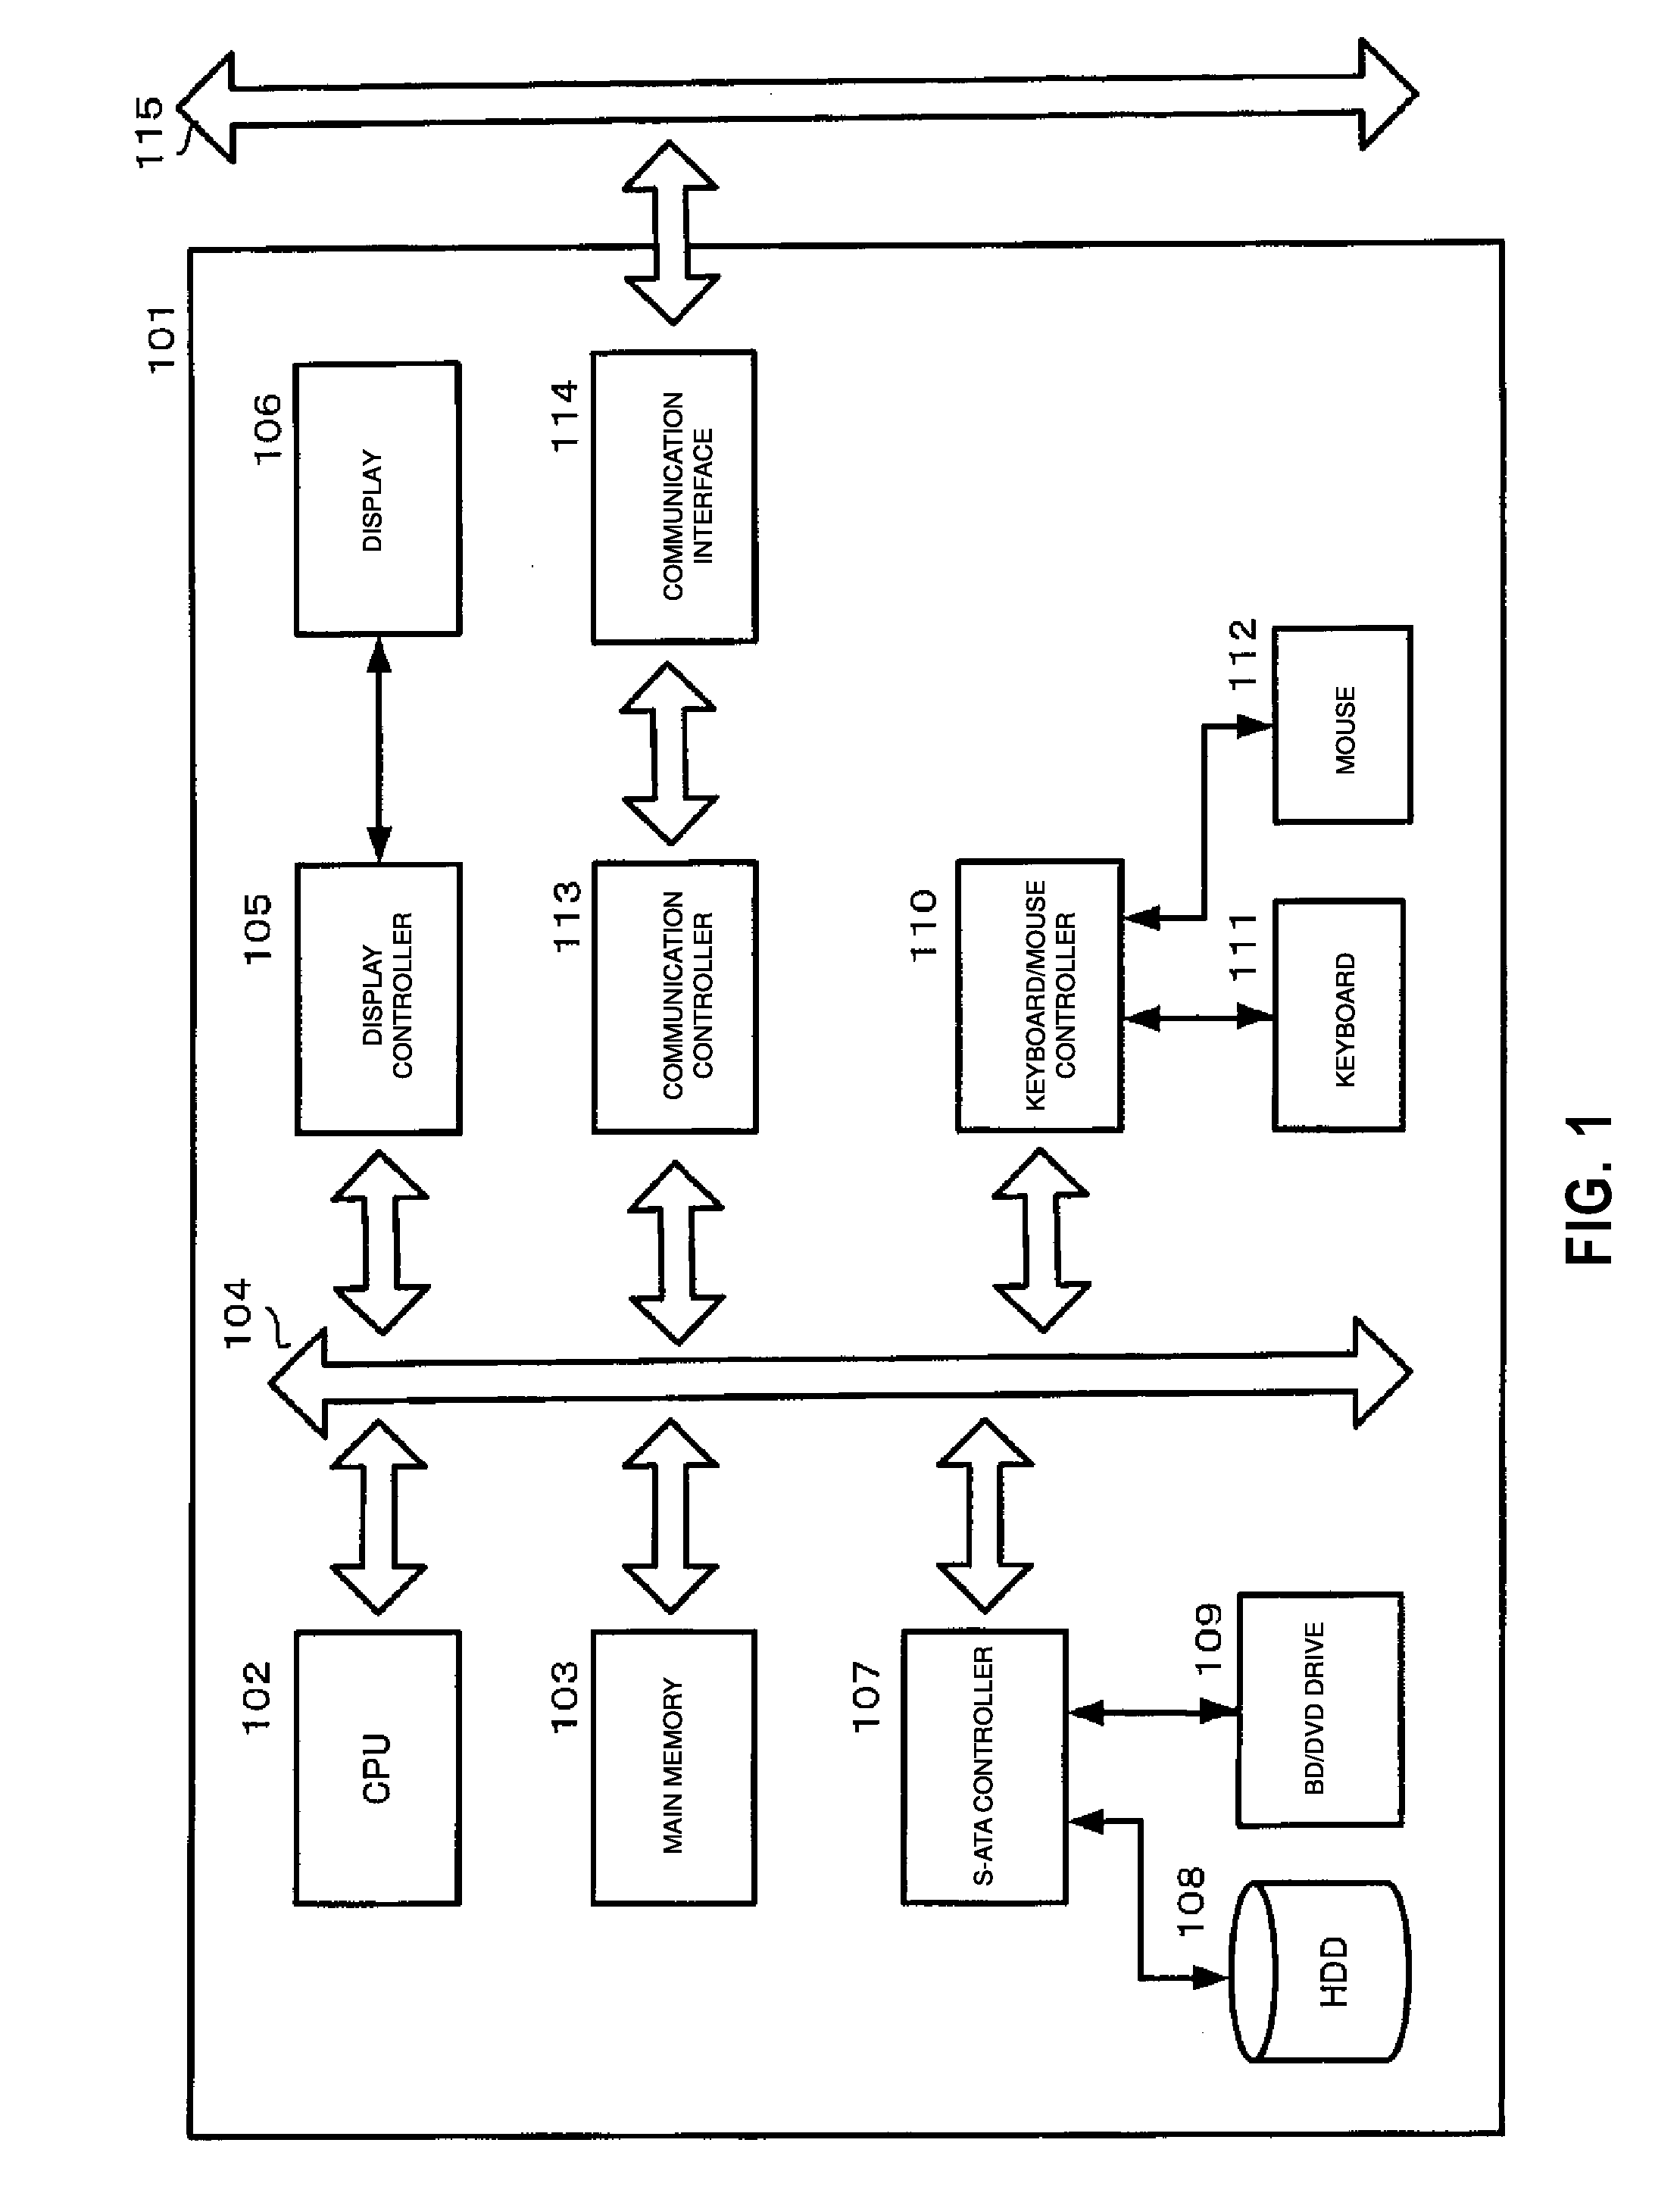 Method of transforming sets of input strings into at least one pattern expression that is string expressing sets of input strings, method of extracting transformation pattern as approximate pattern expression, and computer and computer program for the methods